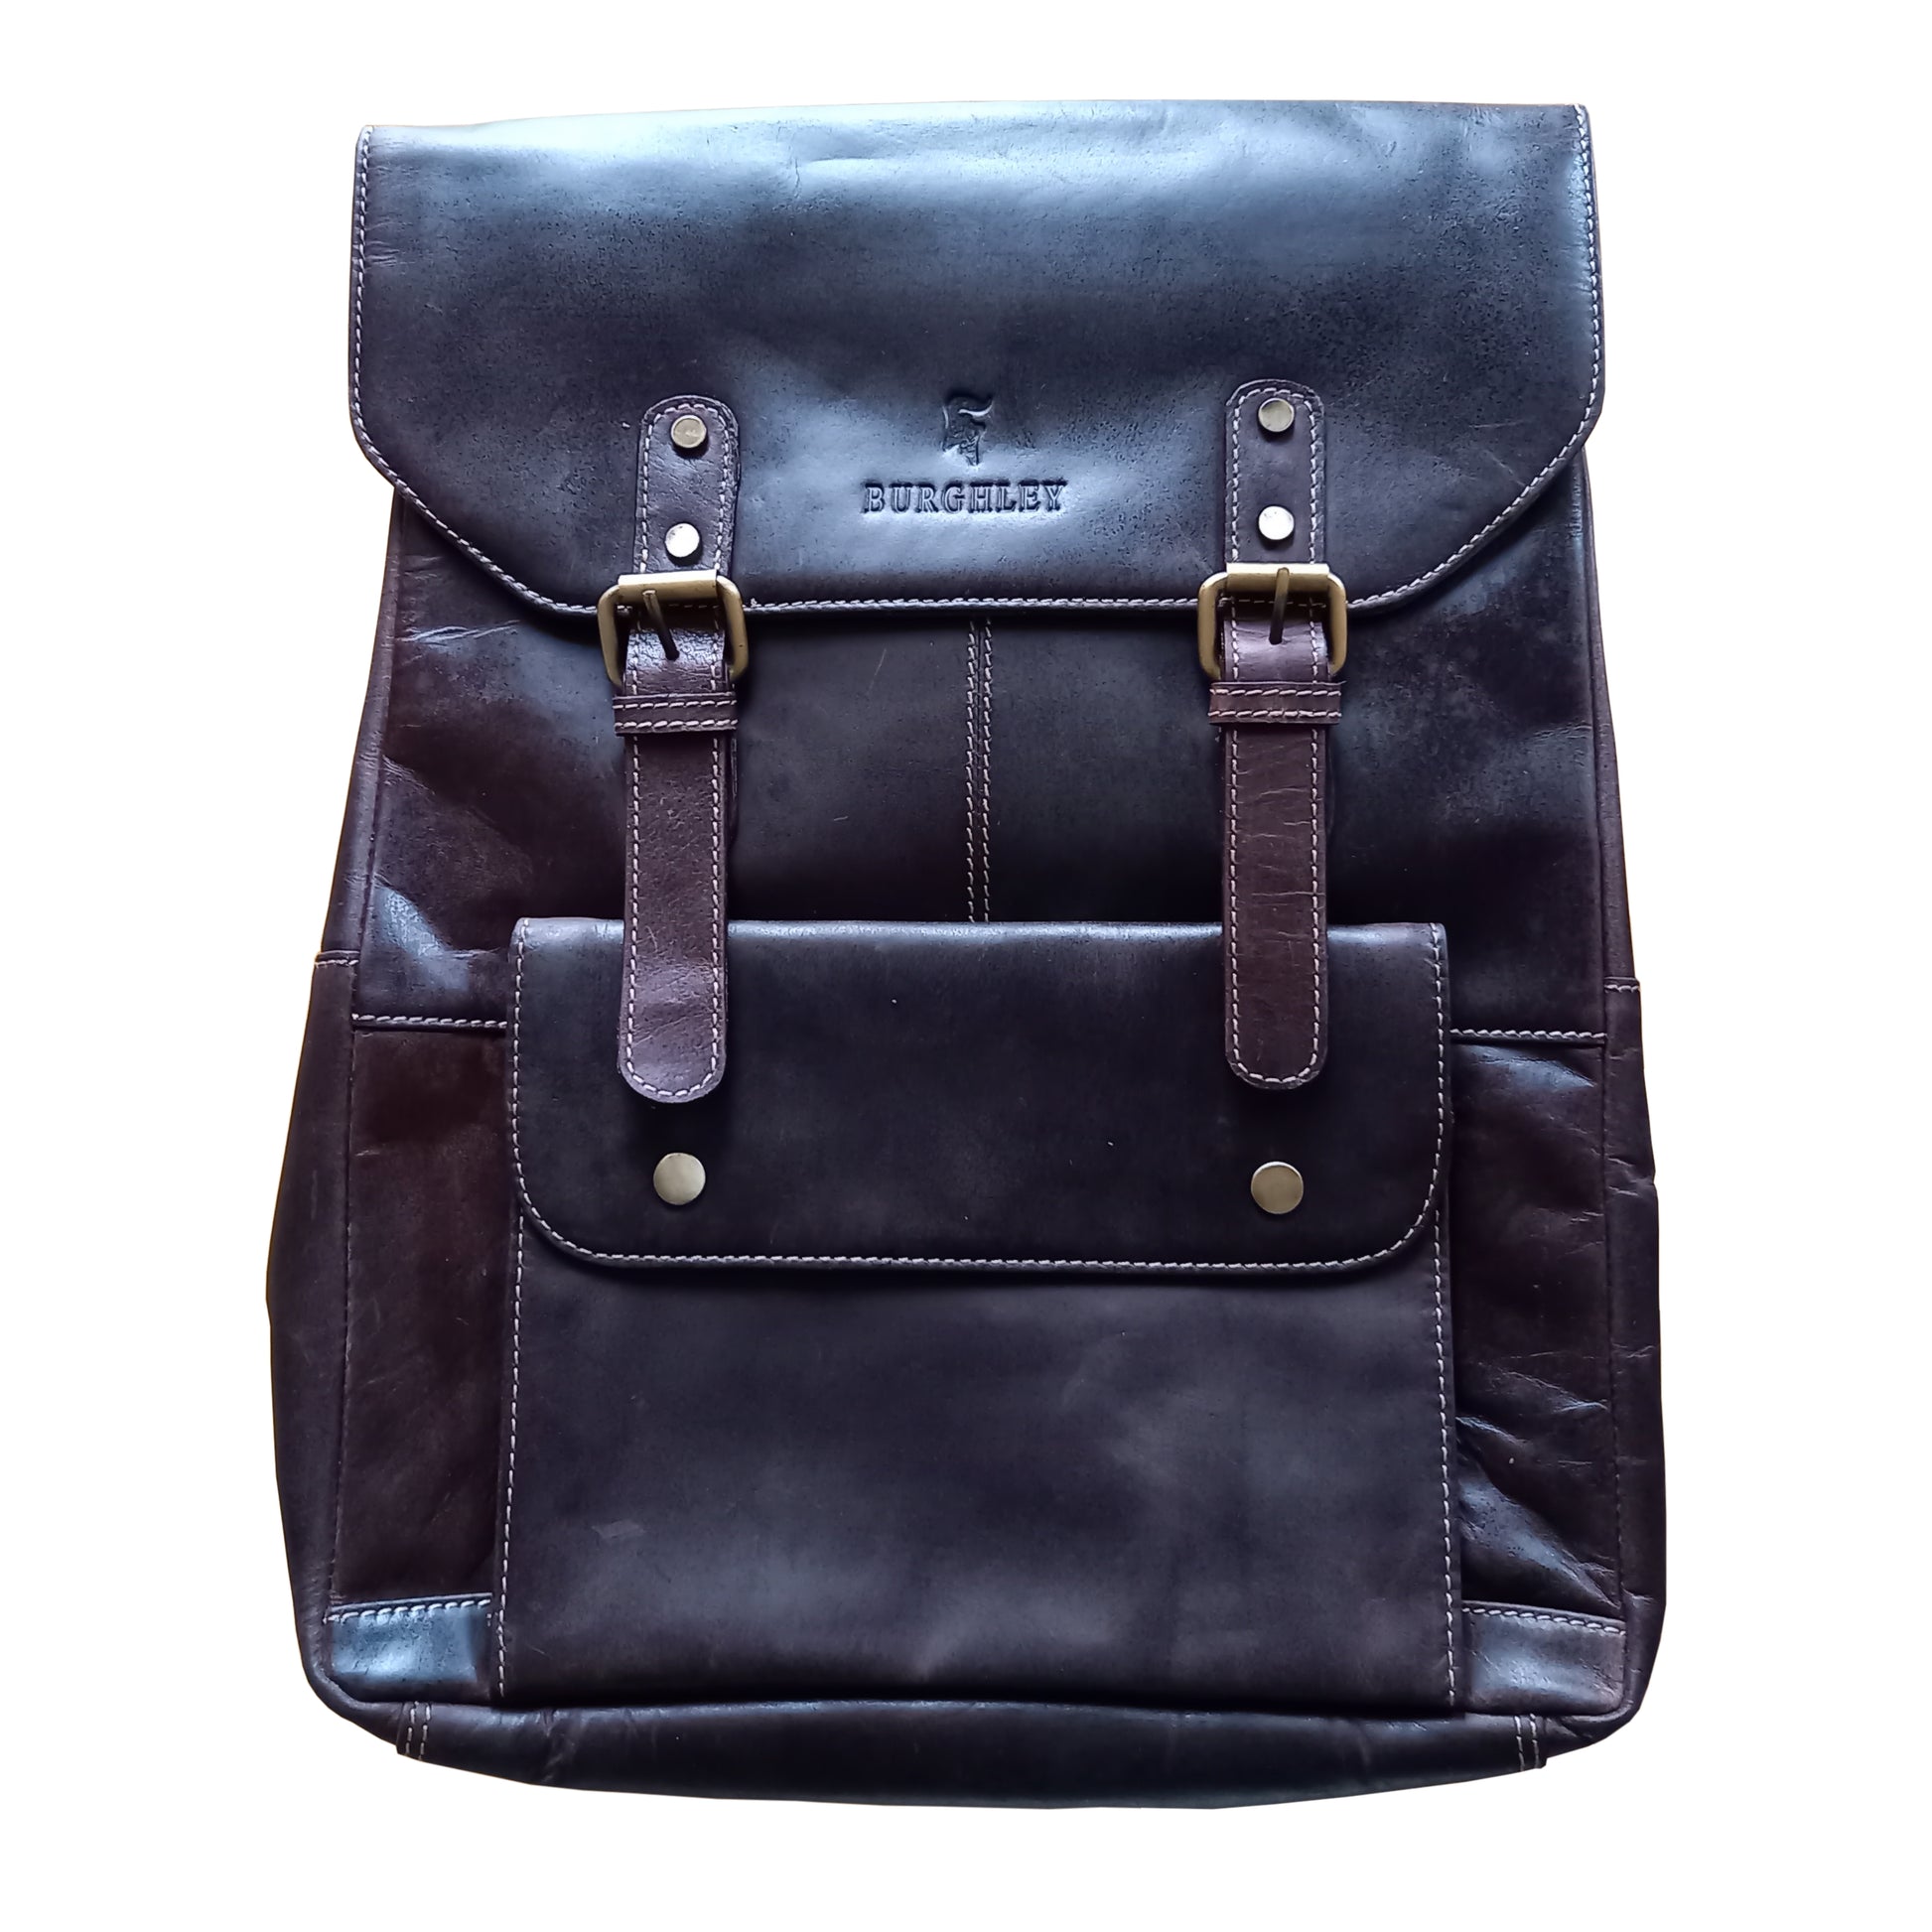 Handmade full leather dark brown vintage backpack with clever straps that convert it to a cross-body bag.